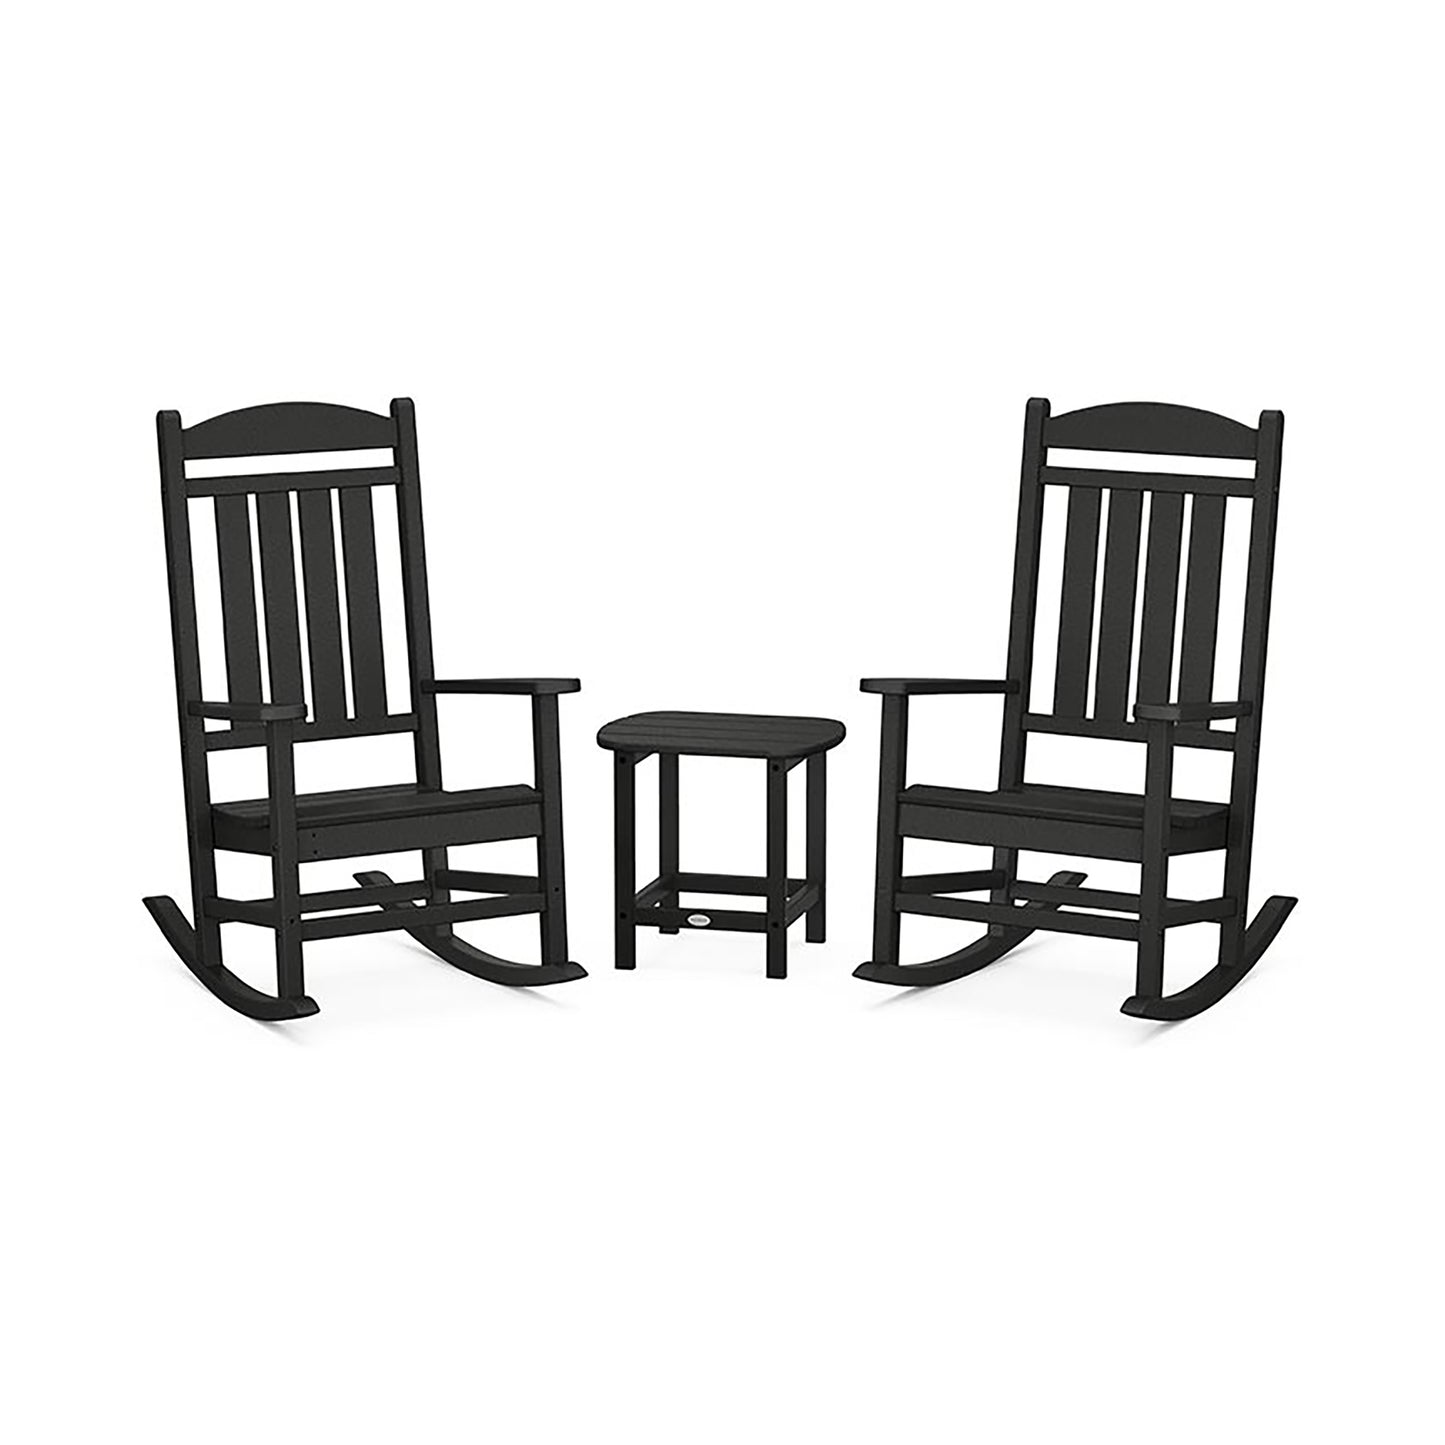 Two black POLYWOOD Presidential Outdoor Rocking Chair 3-Piece Sets, facing each other with a small matching stool between them, set against a white background.